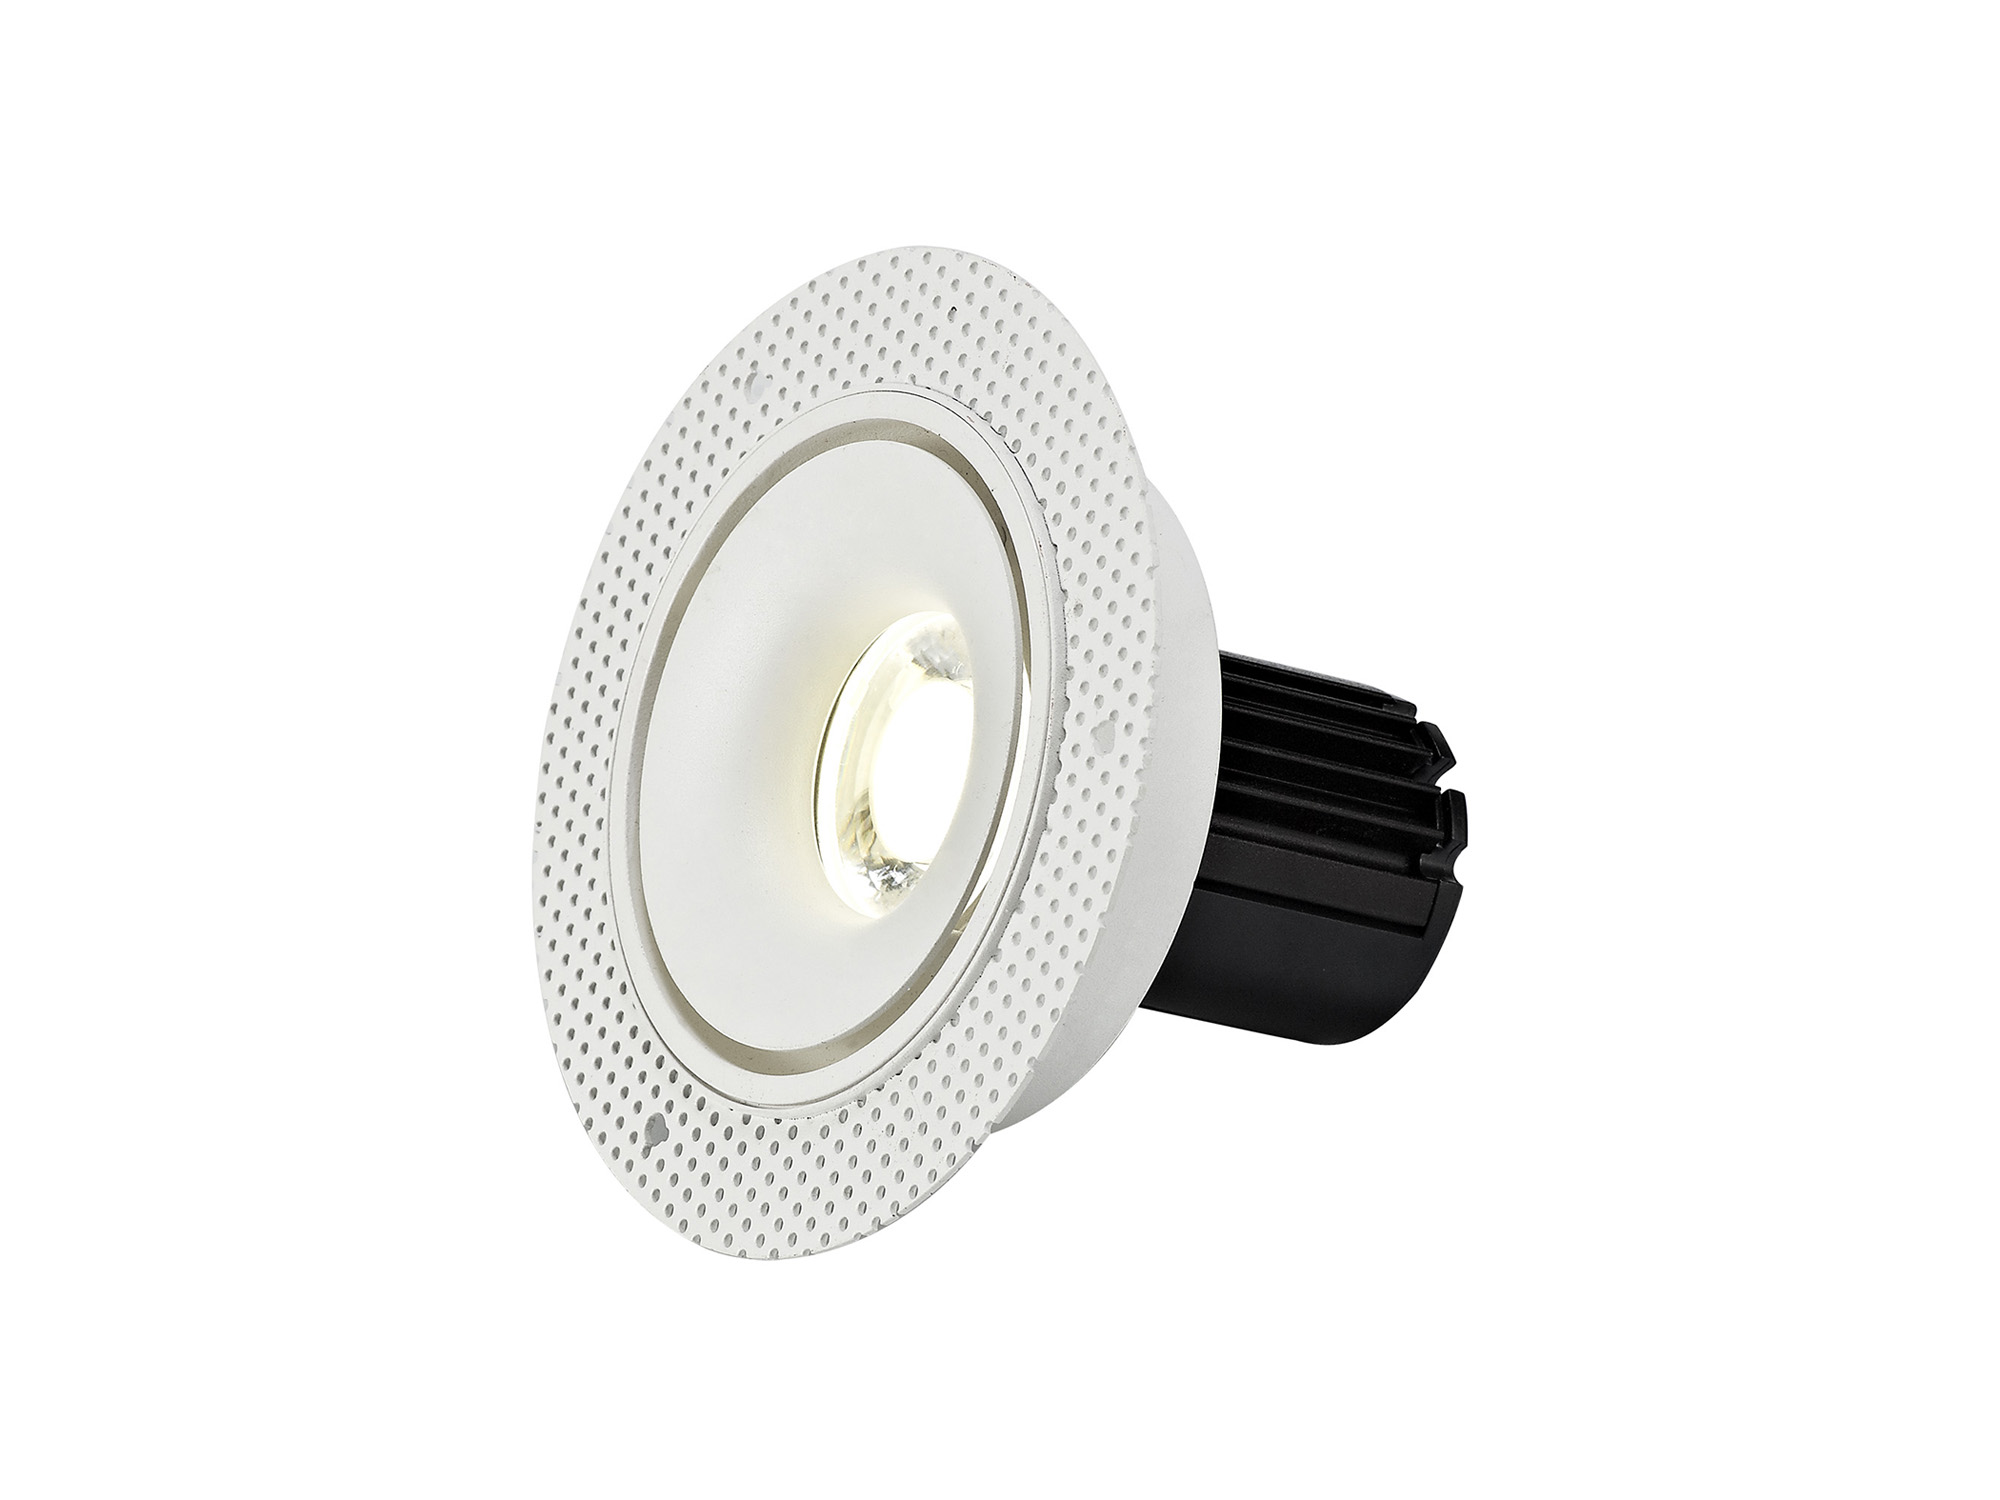 DM201087  Bolor T 10 Tridonic Powered 10W 4000K 810lm 36° CRI>90 LED Engine White/White Trimless Fixed Recessed Spotlight, IP20